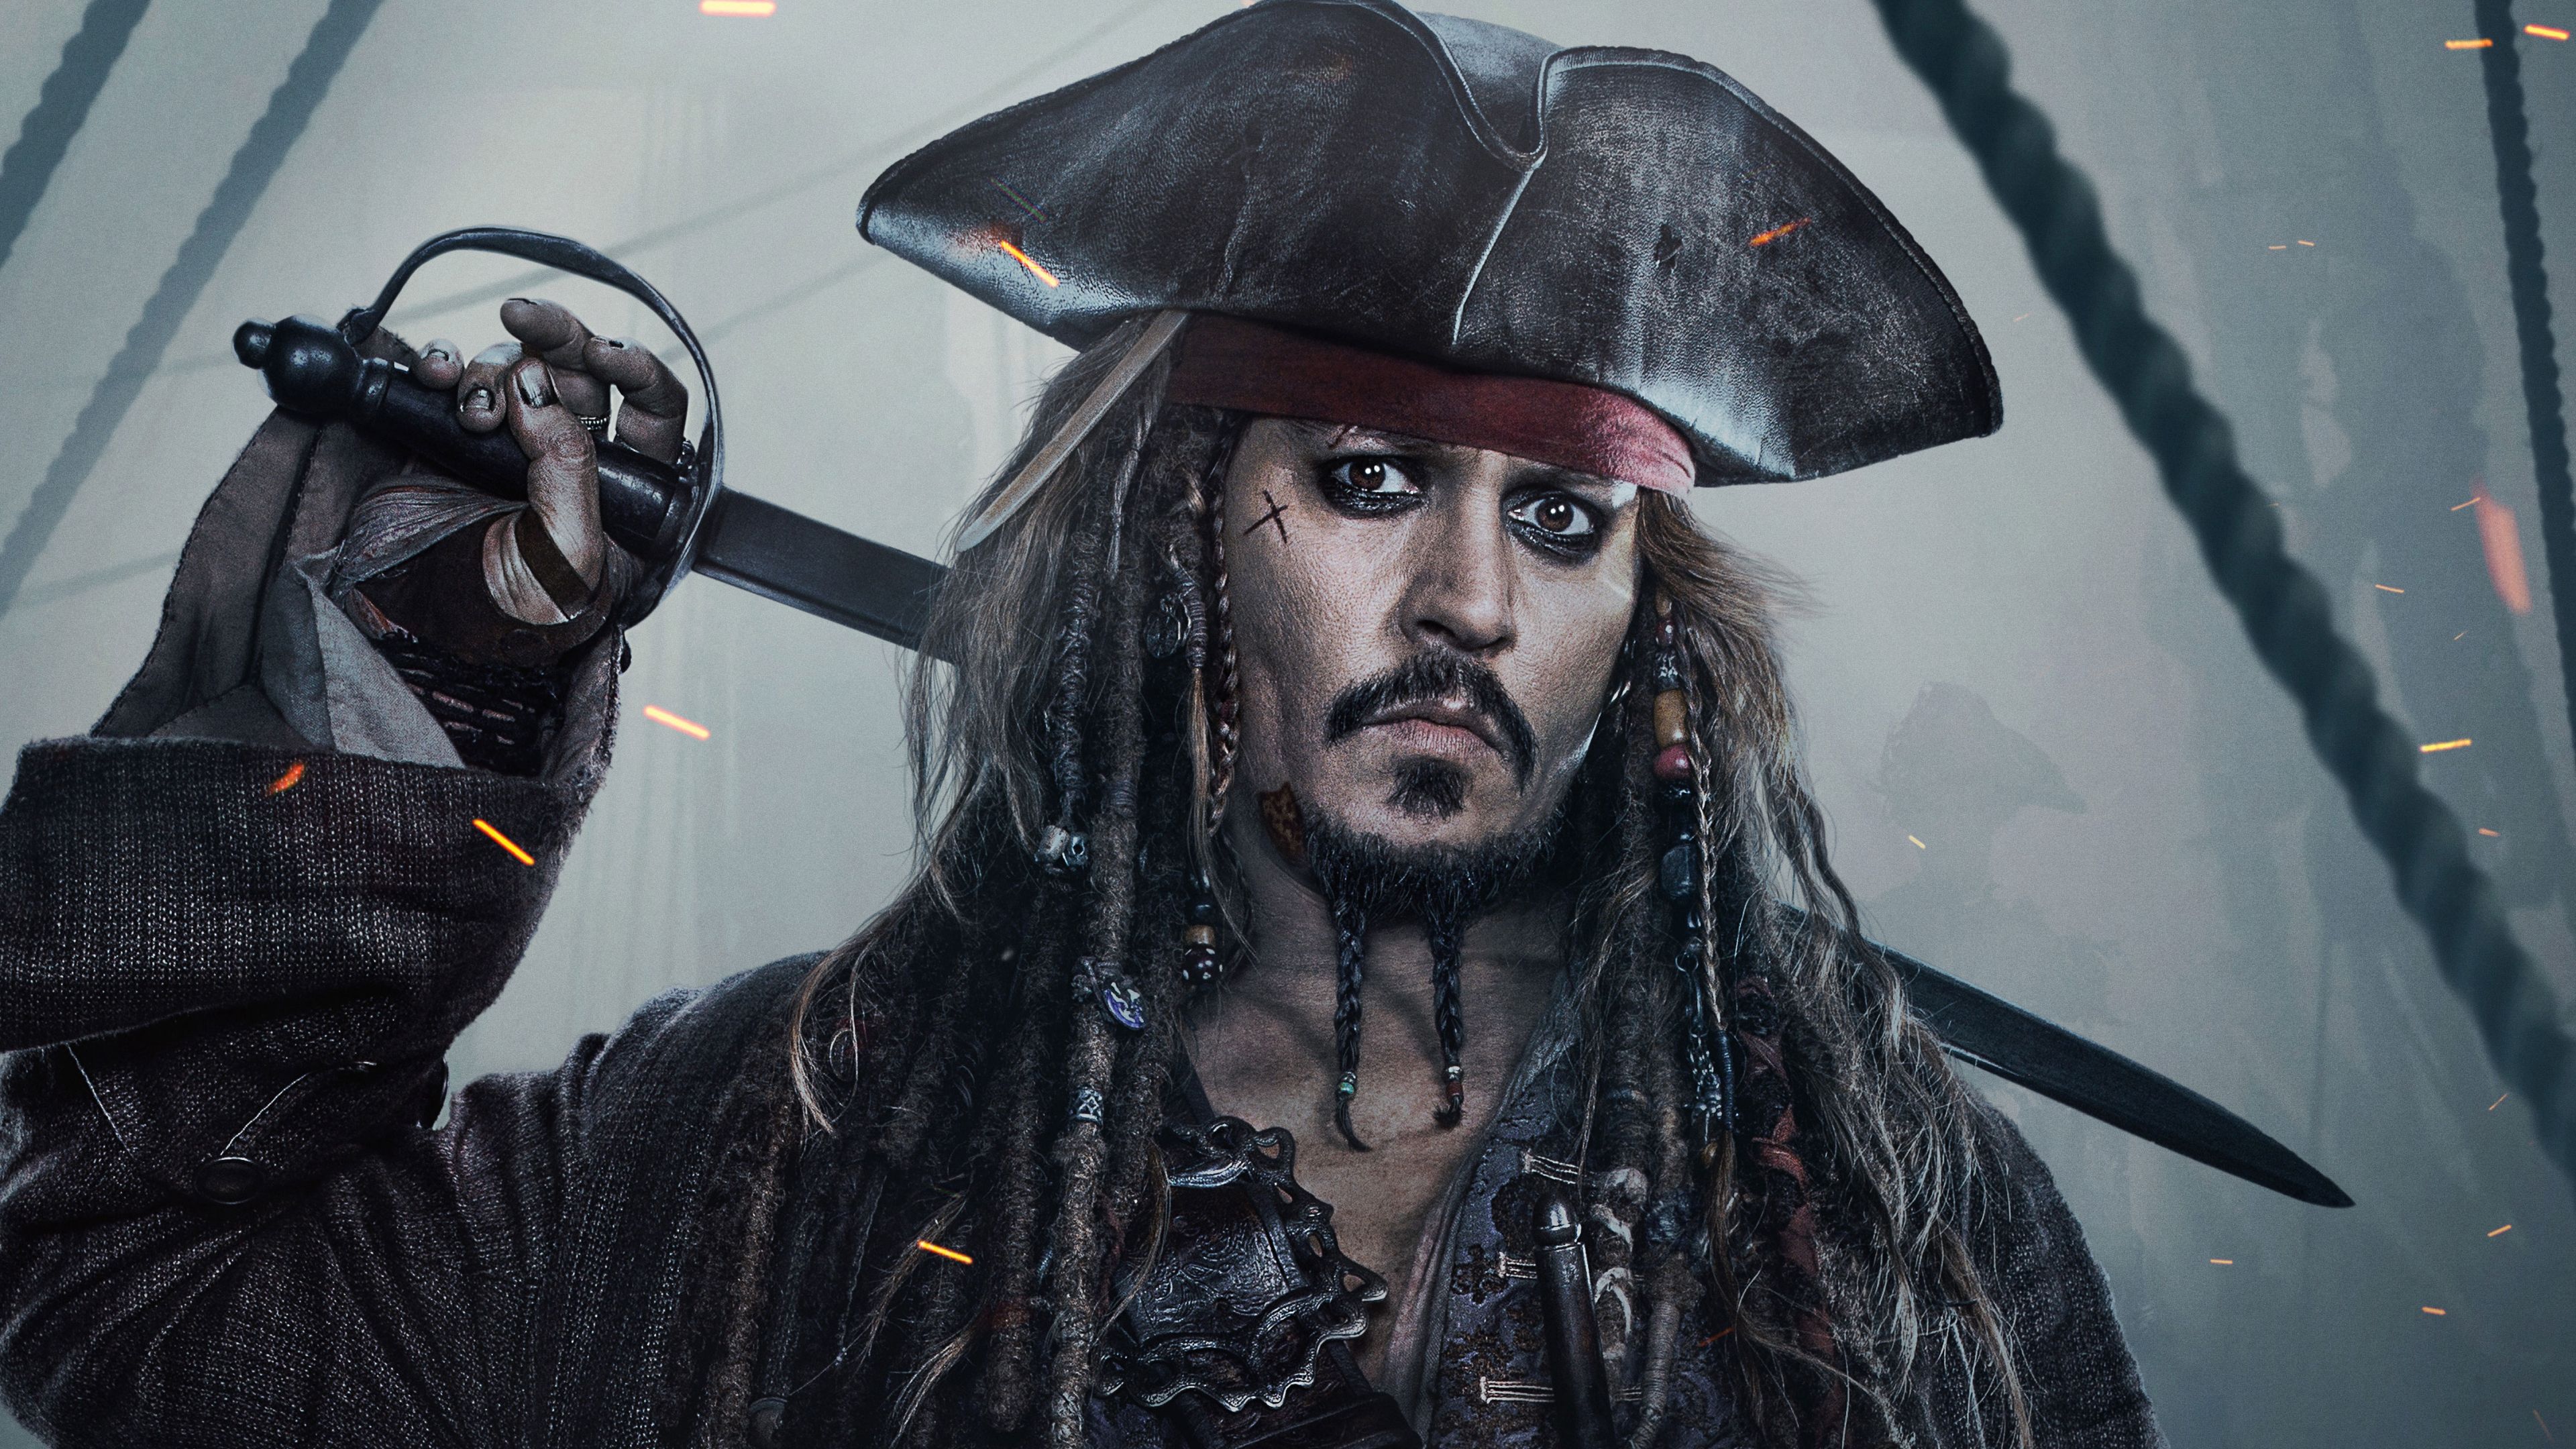 Desktop Wallpaper Jack Sparrow In Pirates Of The Caribbean: Dead Men Tell No Tales, Movie, 4k, HD Image, Picture, Background, Mde2wr